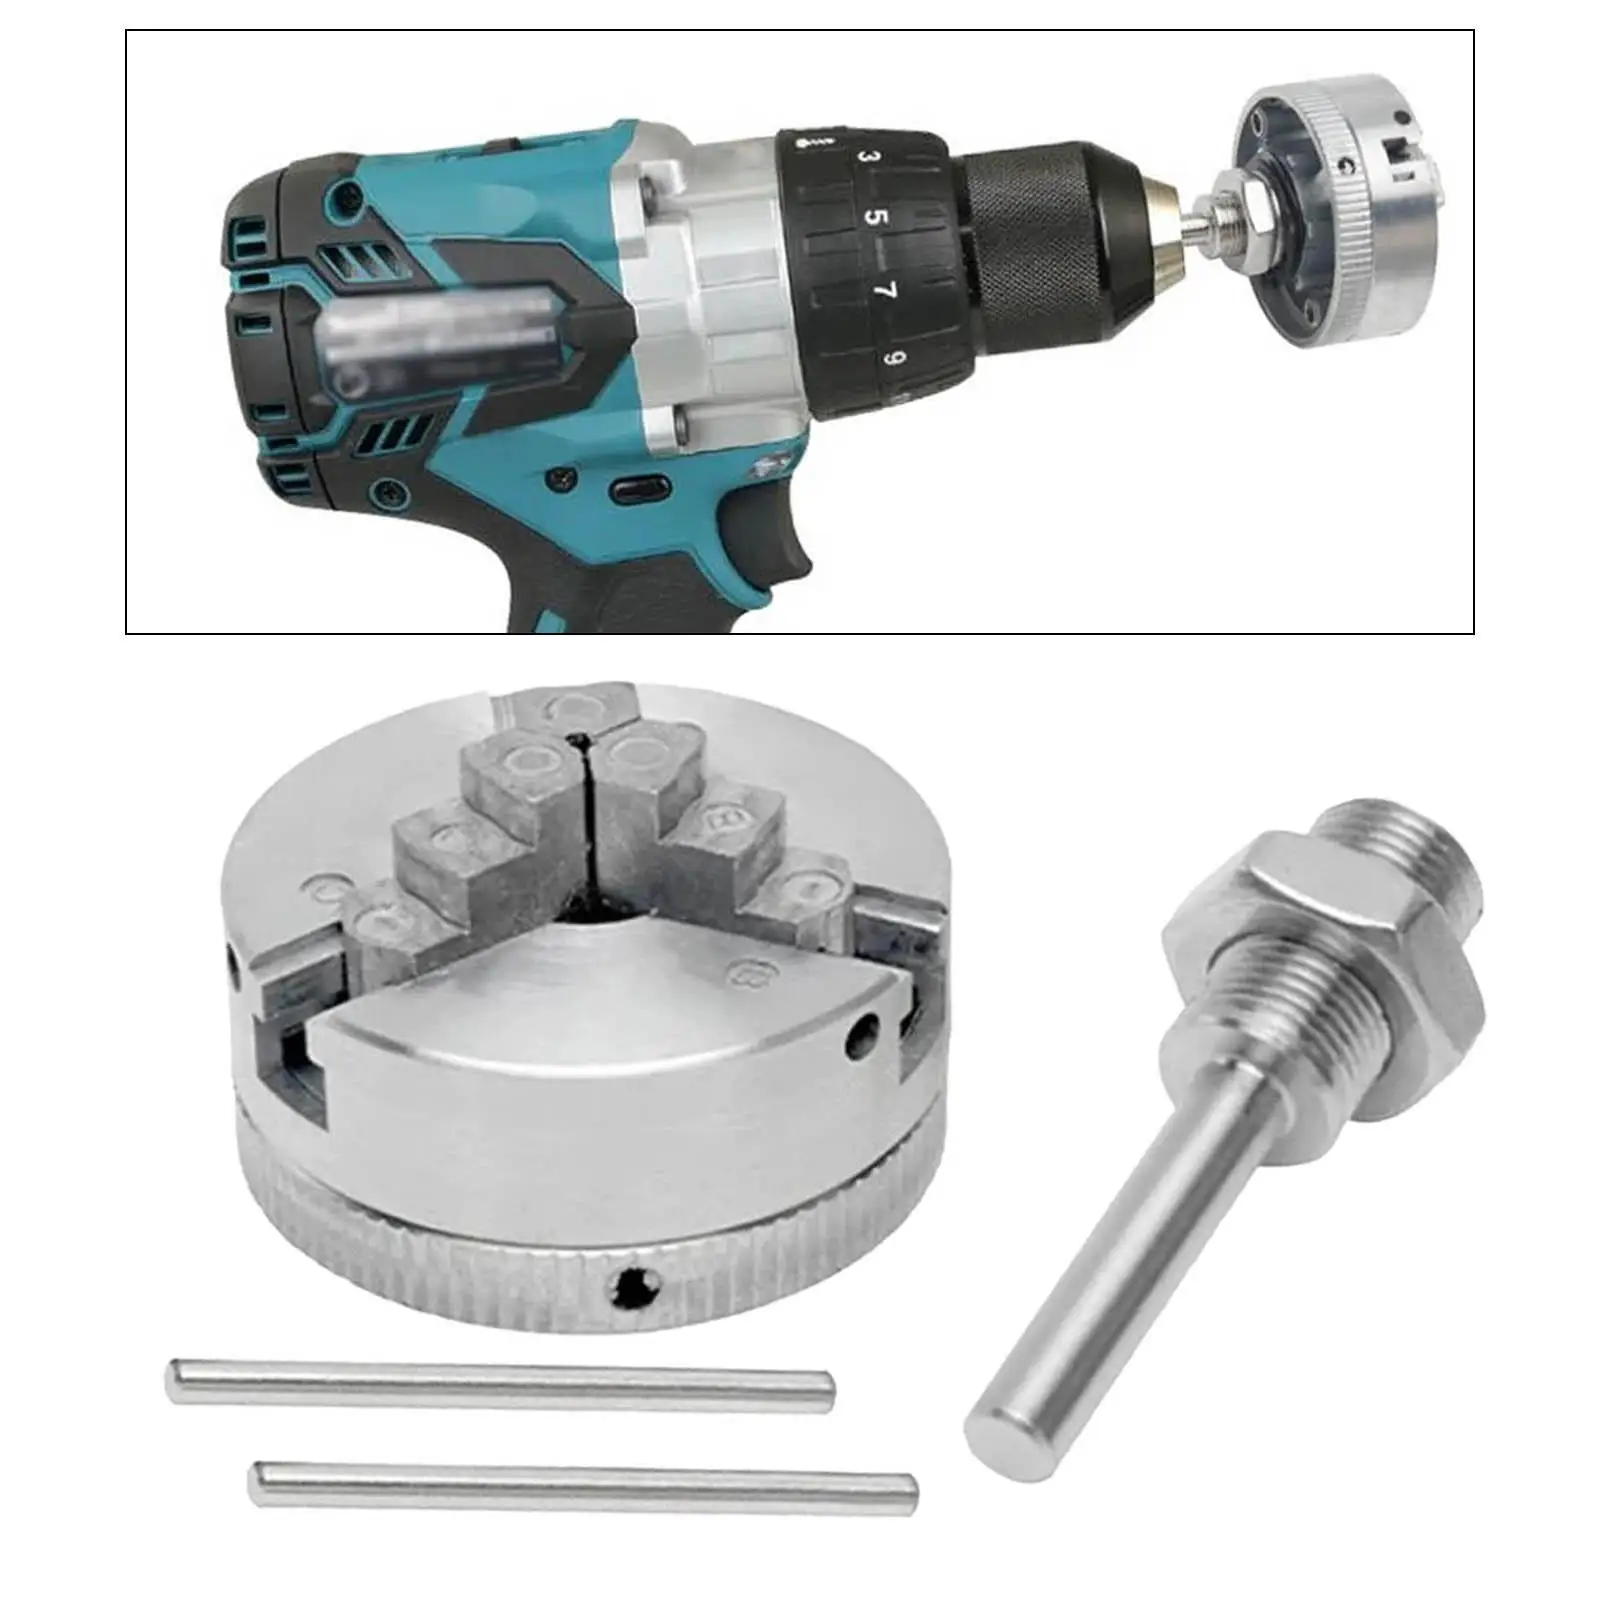 3 Jaws Chuck Portable Electric Drill Chuck Self Centering Lathe Chuck for Grinding Machine Milling Machine Mini Lathe Parts